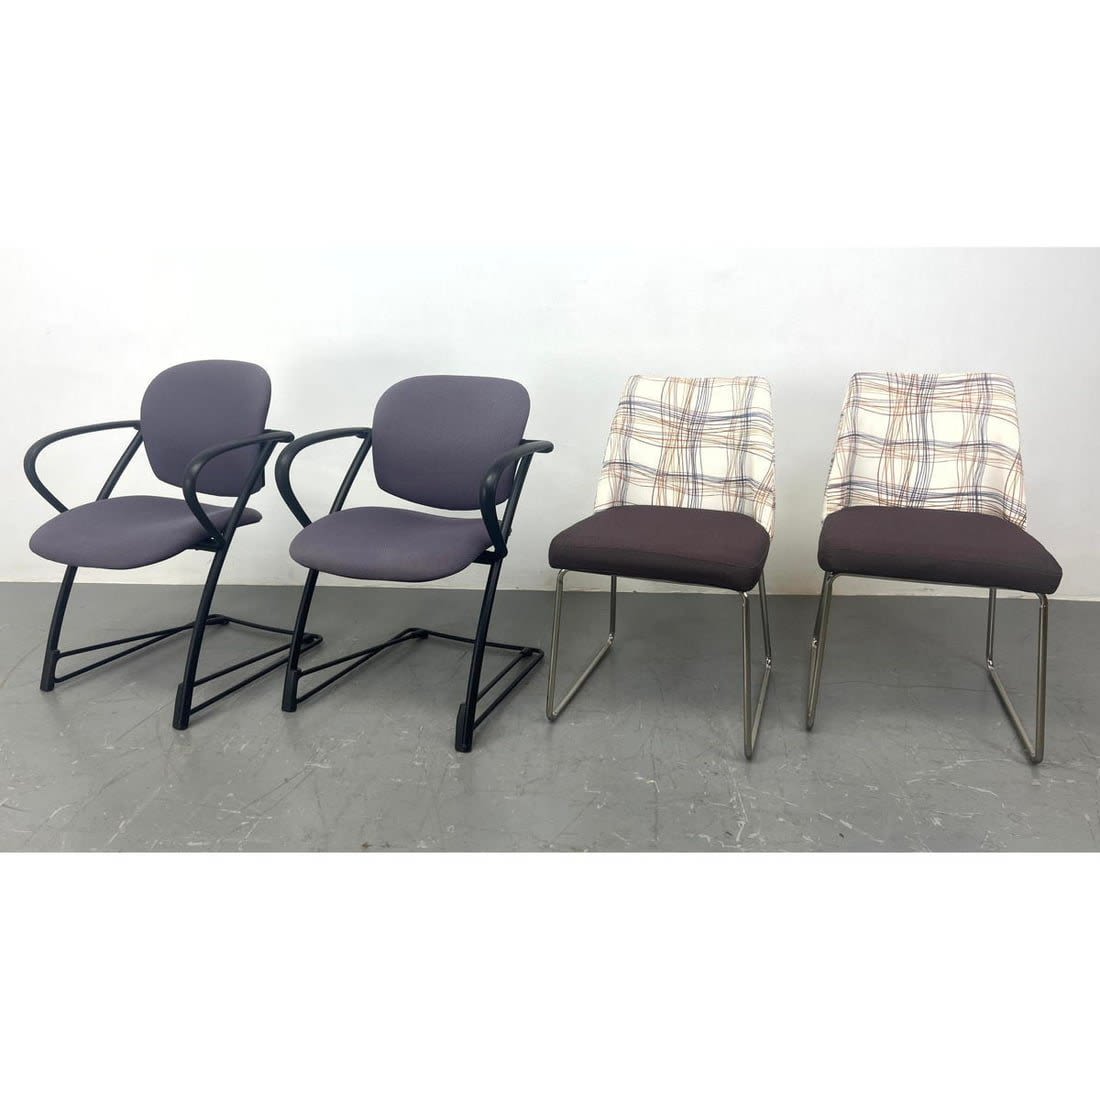 2 pairs of Chairs. Steelcase arm